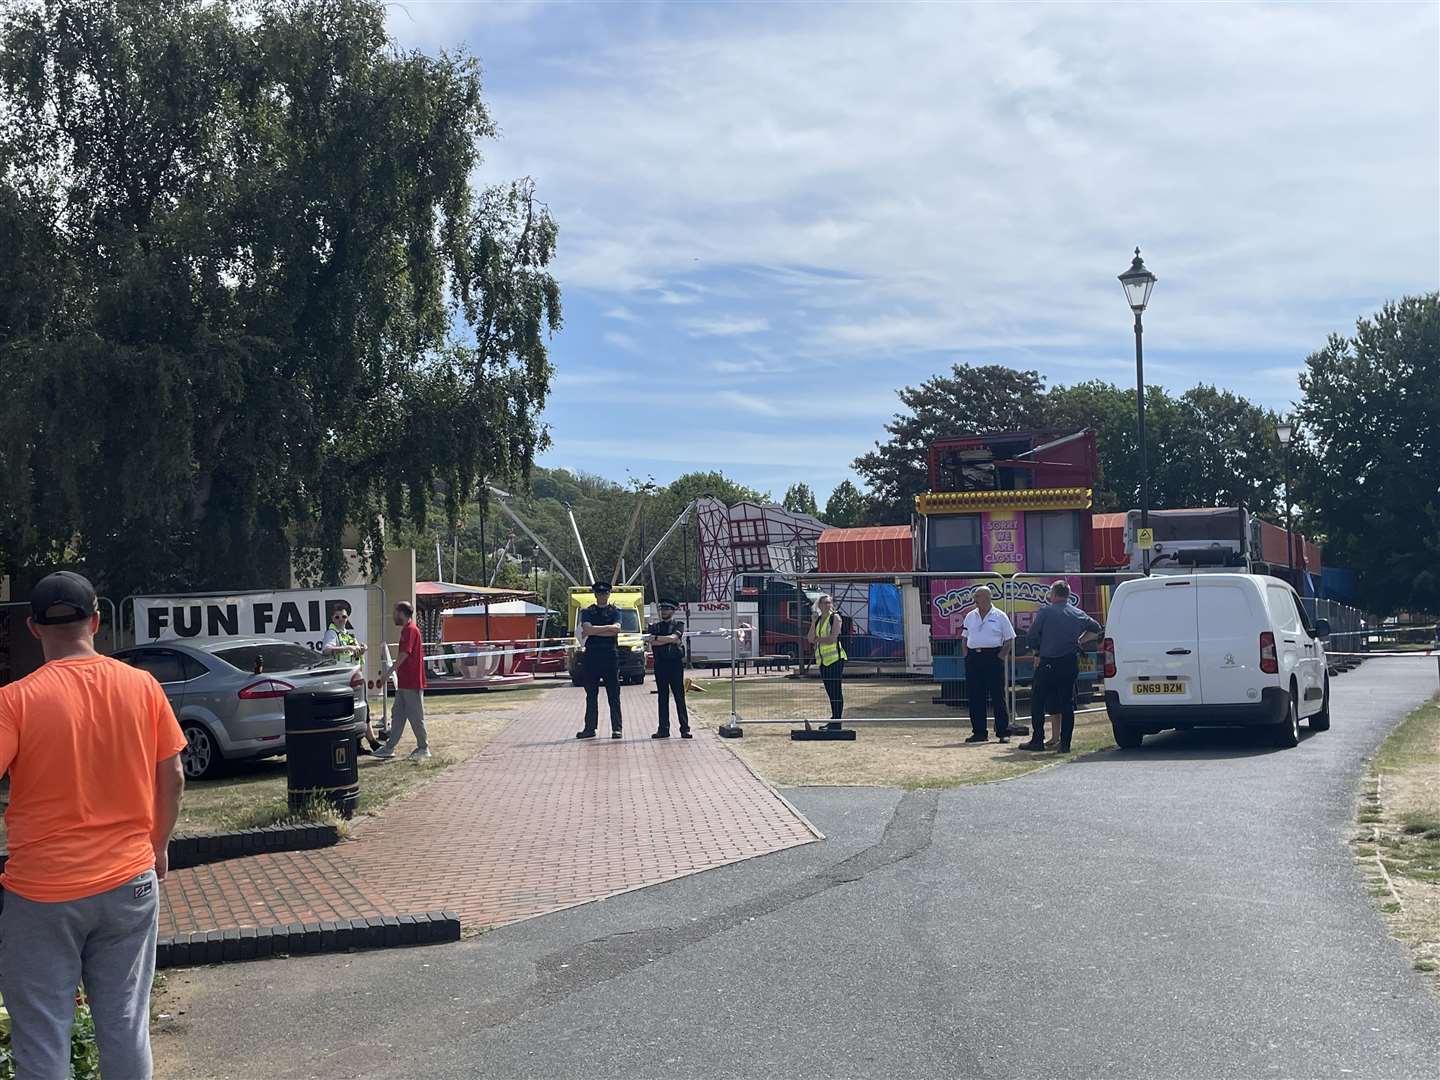 The funfair in Pencester Gardens was cordoned off by police after the tragedy